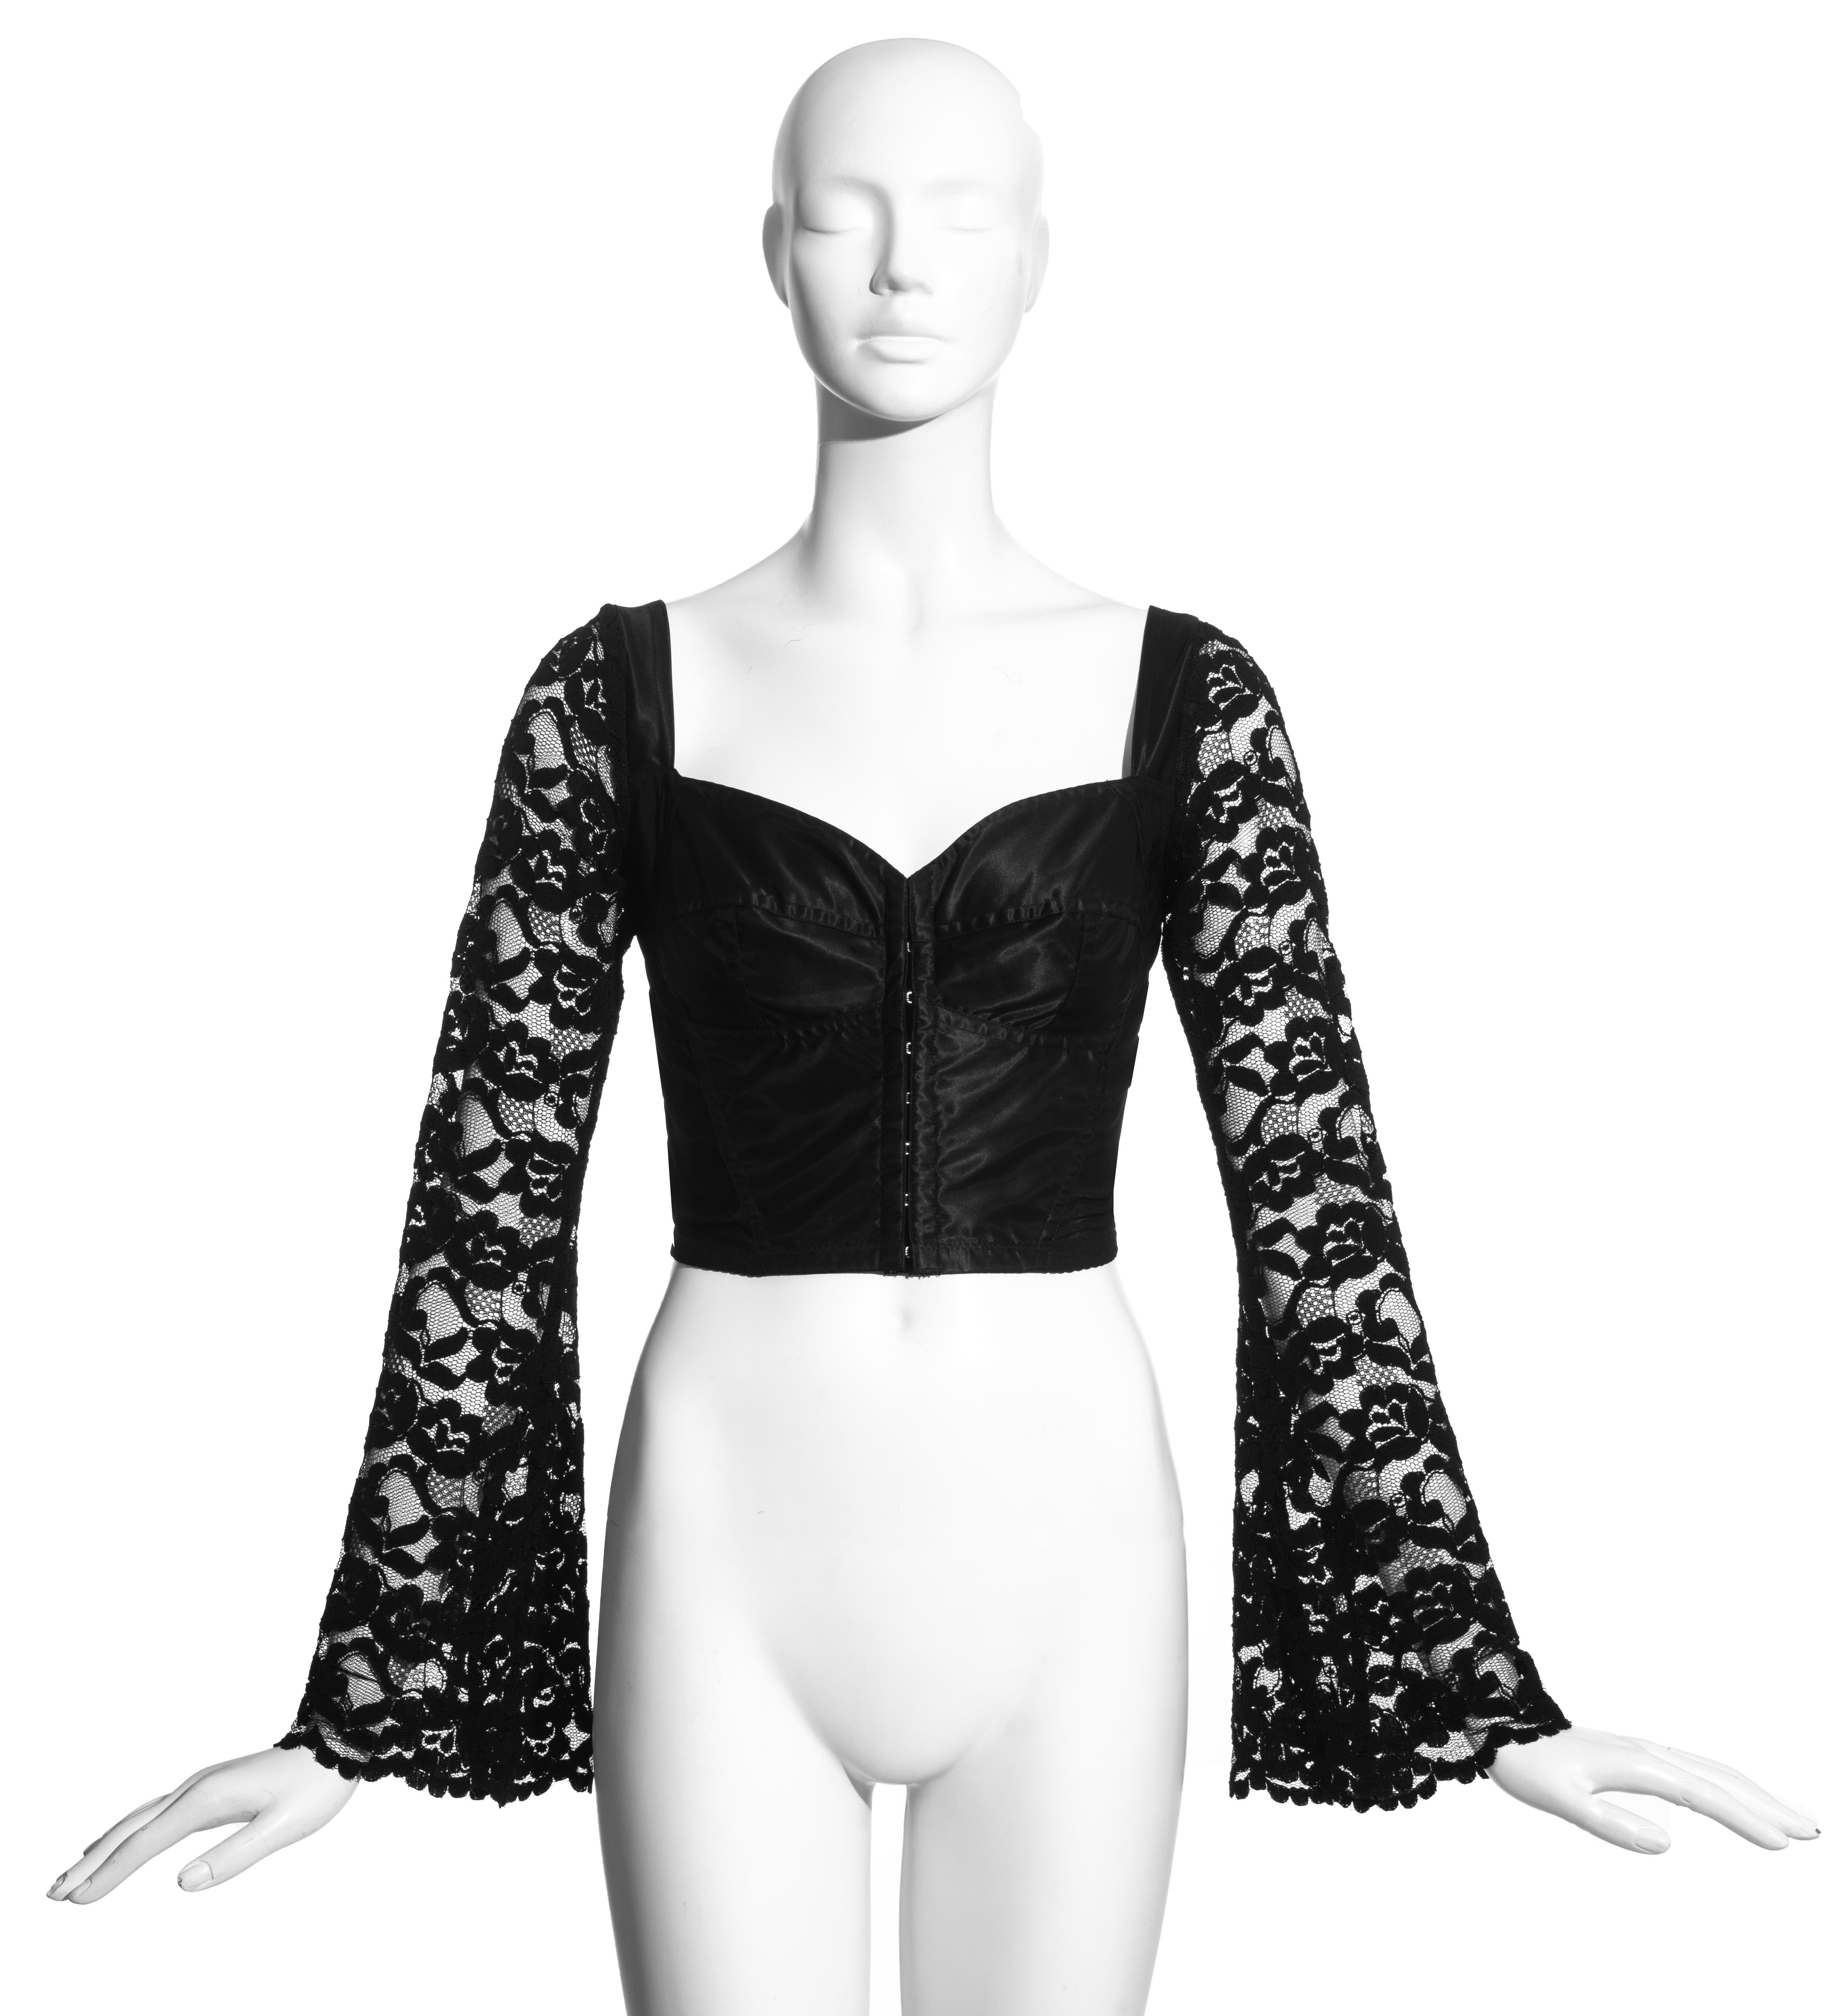 Dolce & Gabbana black satin spandex corset with lace bell sleeves.

Spring-Summer 1993